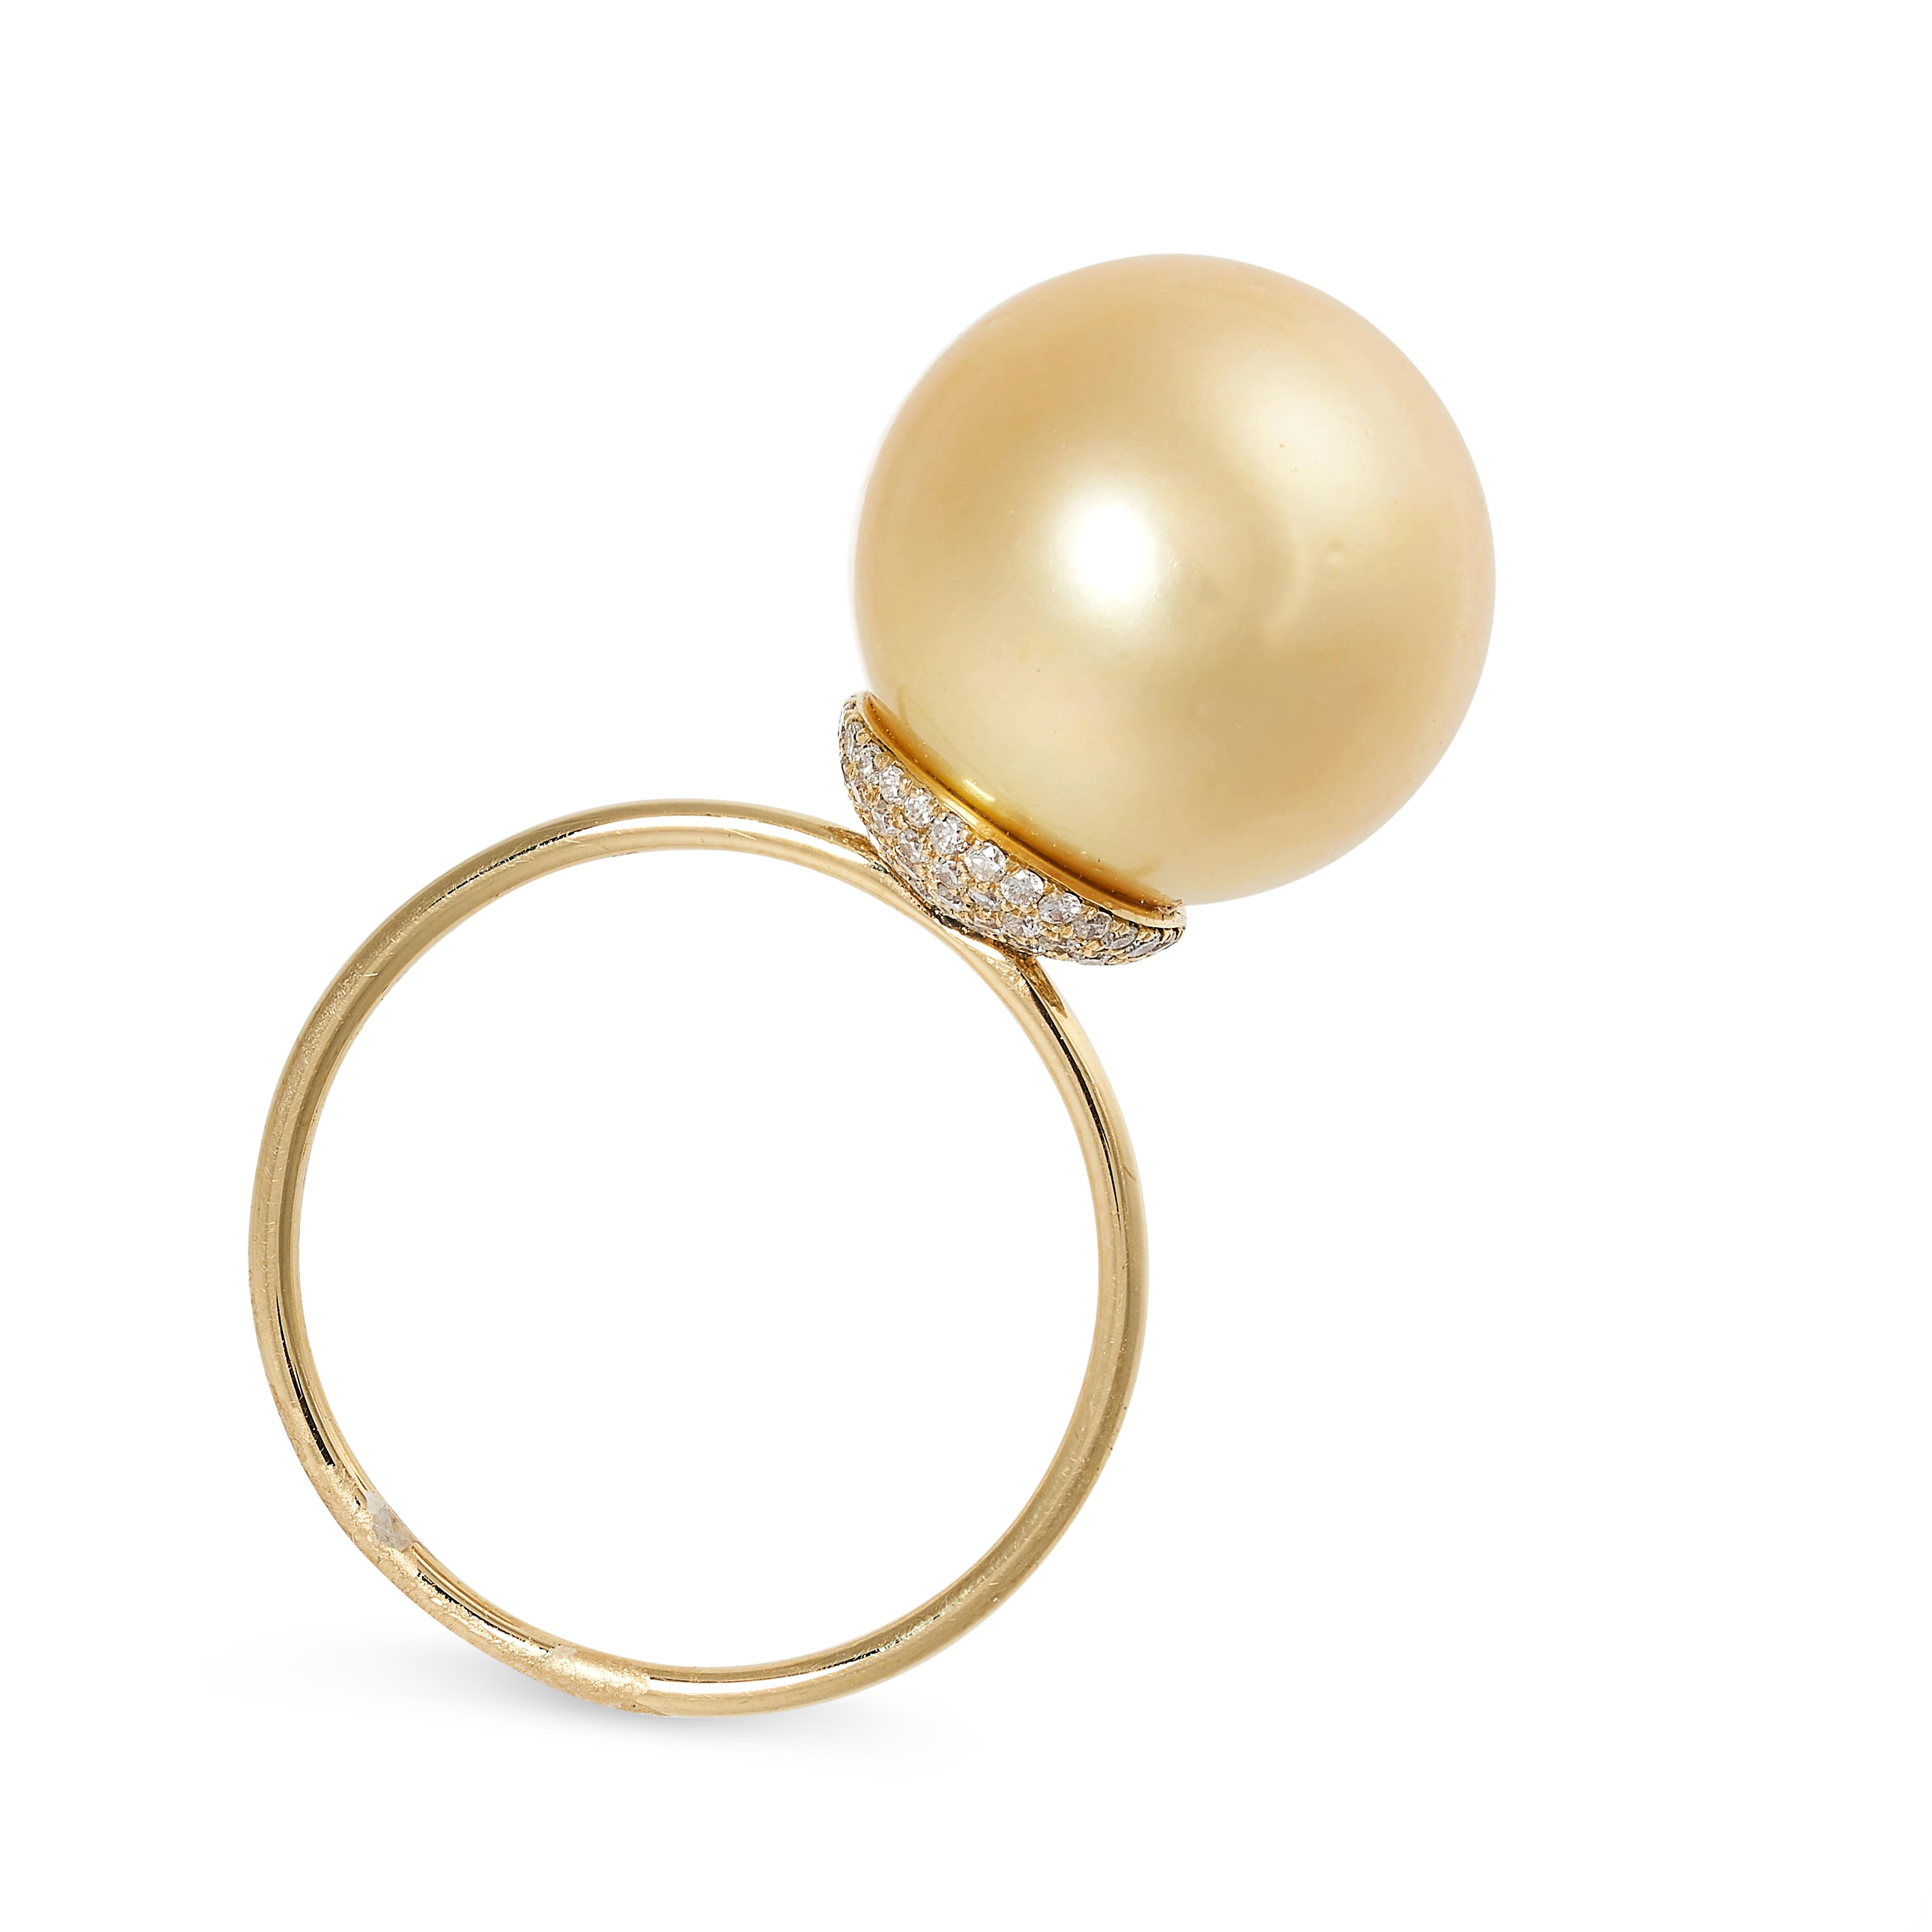 A SOUTH SEA PEARL AND DIAMOND RING set with a golden South Sea pearl of 14.0mm accented by brilliant - Image 2 of 2